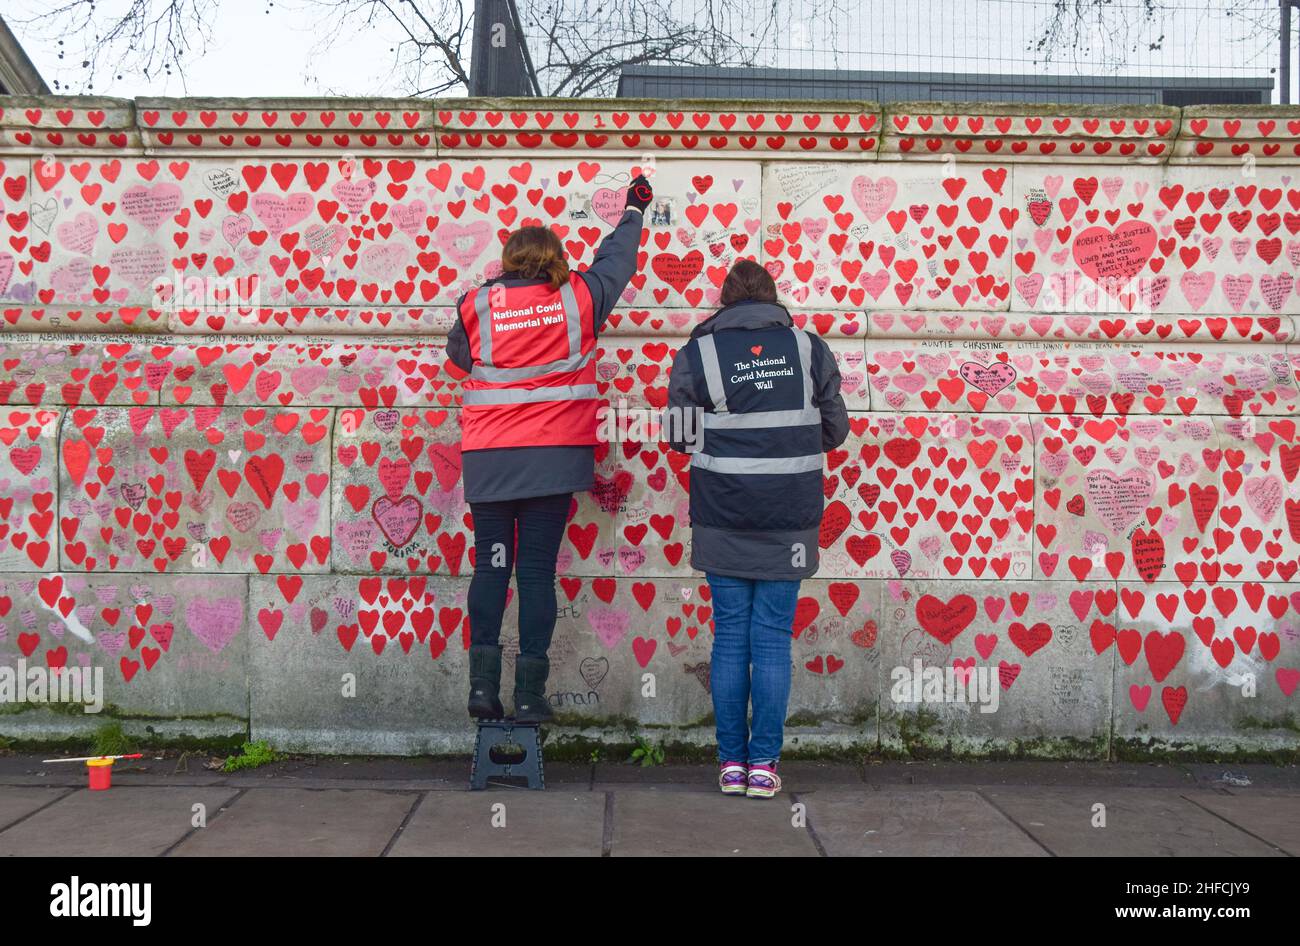 London, UK. 14th Jan, 2022. Volunteers paint red hearts on the National Covid Memorial Wall. Over 150,000 hearts have been painted to date on the wall outside St Thomas' Hospital opposite the Houses of Parliament, one for each life lost to COVID-19. Credit: SOPA Images Limited/Alamy Live News Stock Photo